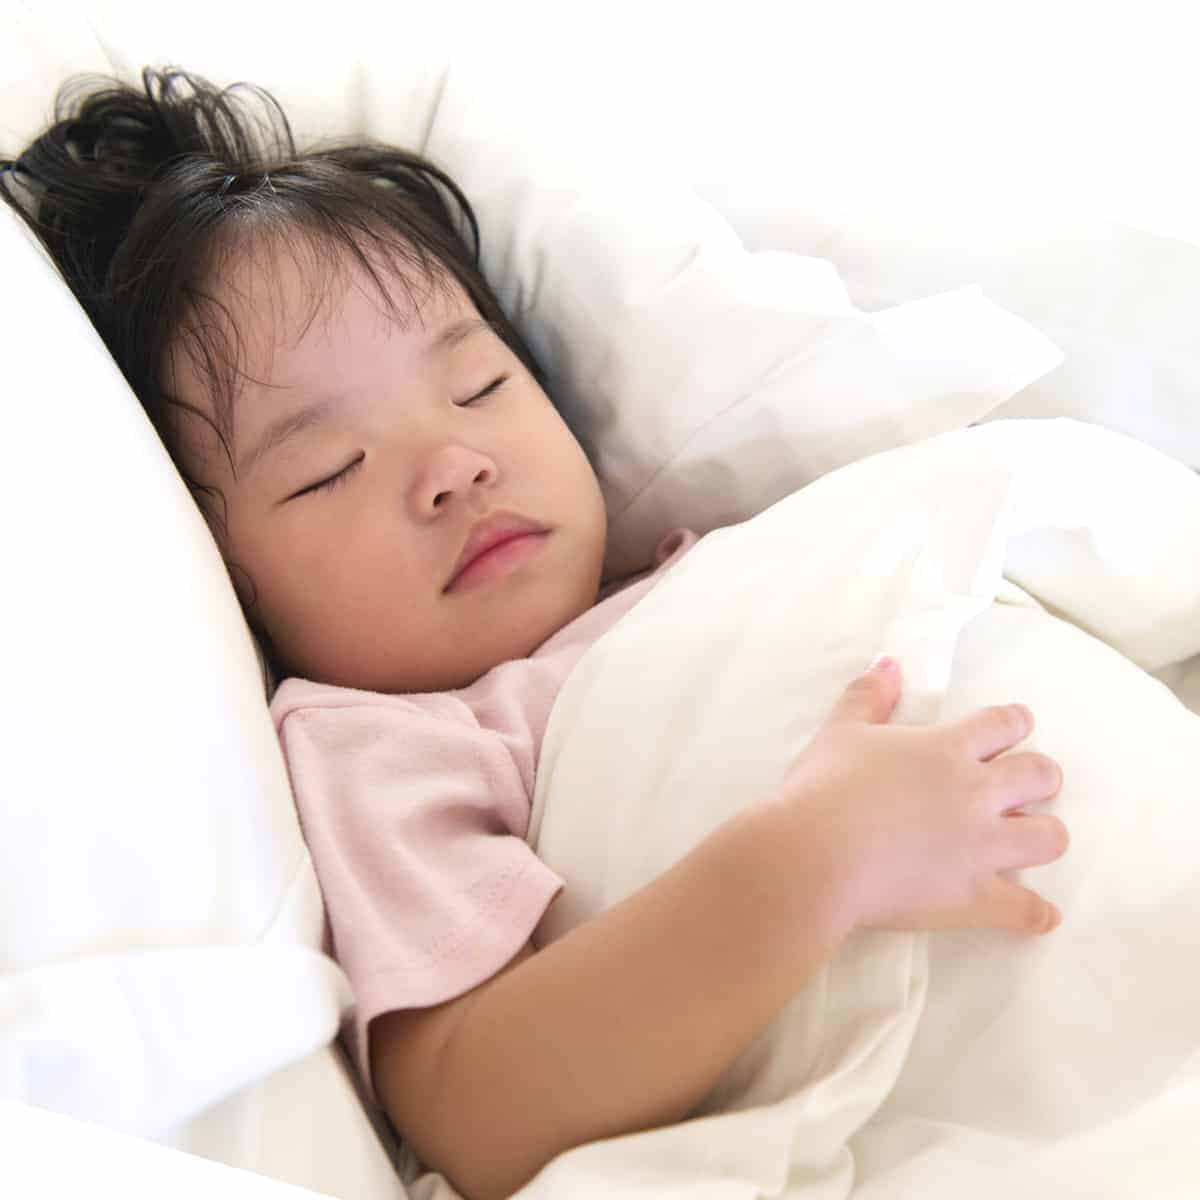 7 Weighted Blankets to Help Kids Sleep and Relax in 2022!